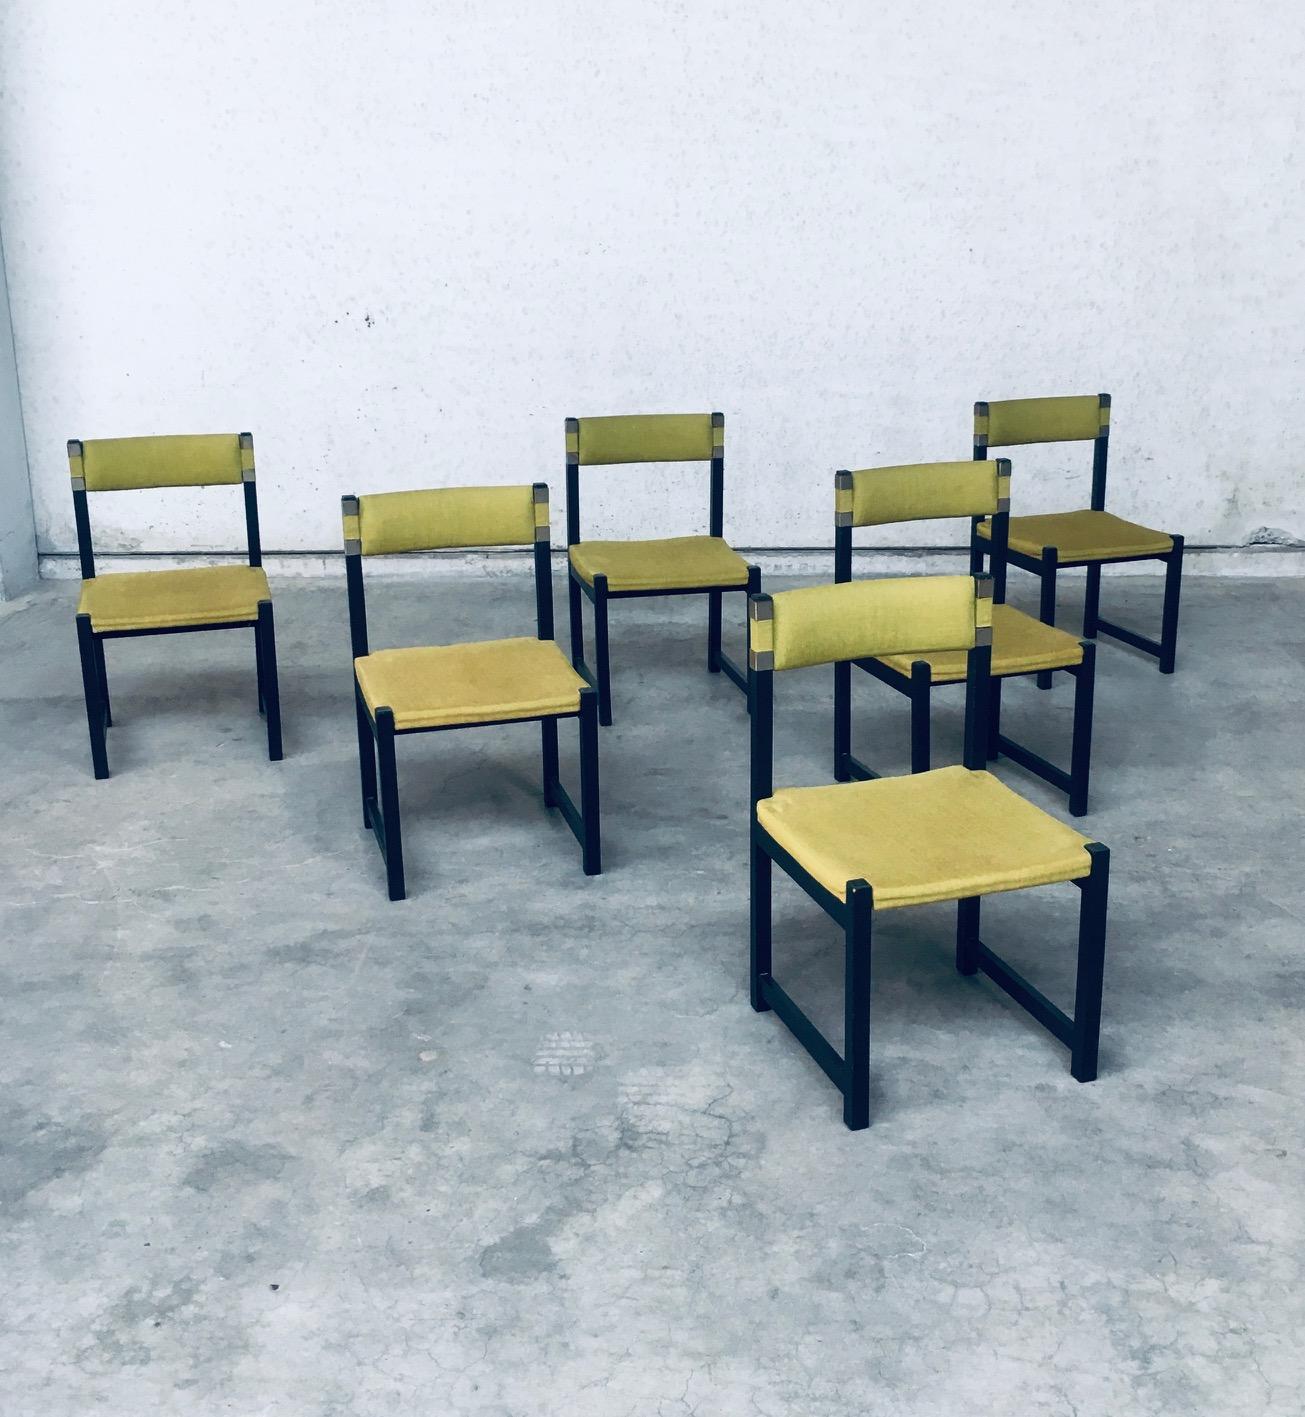 Vintage Midcentury Modern Belgian Design Dining Chair set of 6 designed by Jean Batenburg for MI. Made in Belgium, 1969. Black stained solid wood constructed frame with green fabric seat and back. Nice metal details on the back rest. All chairs are